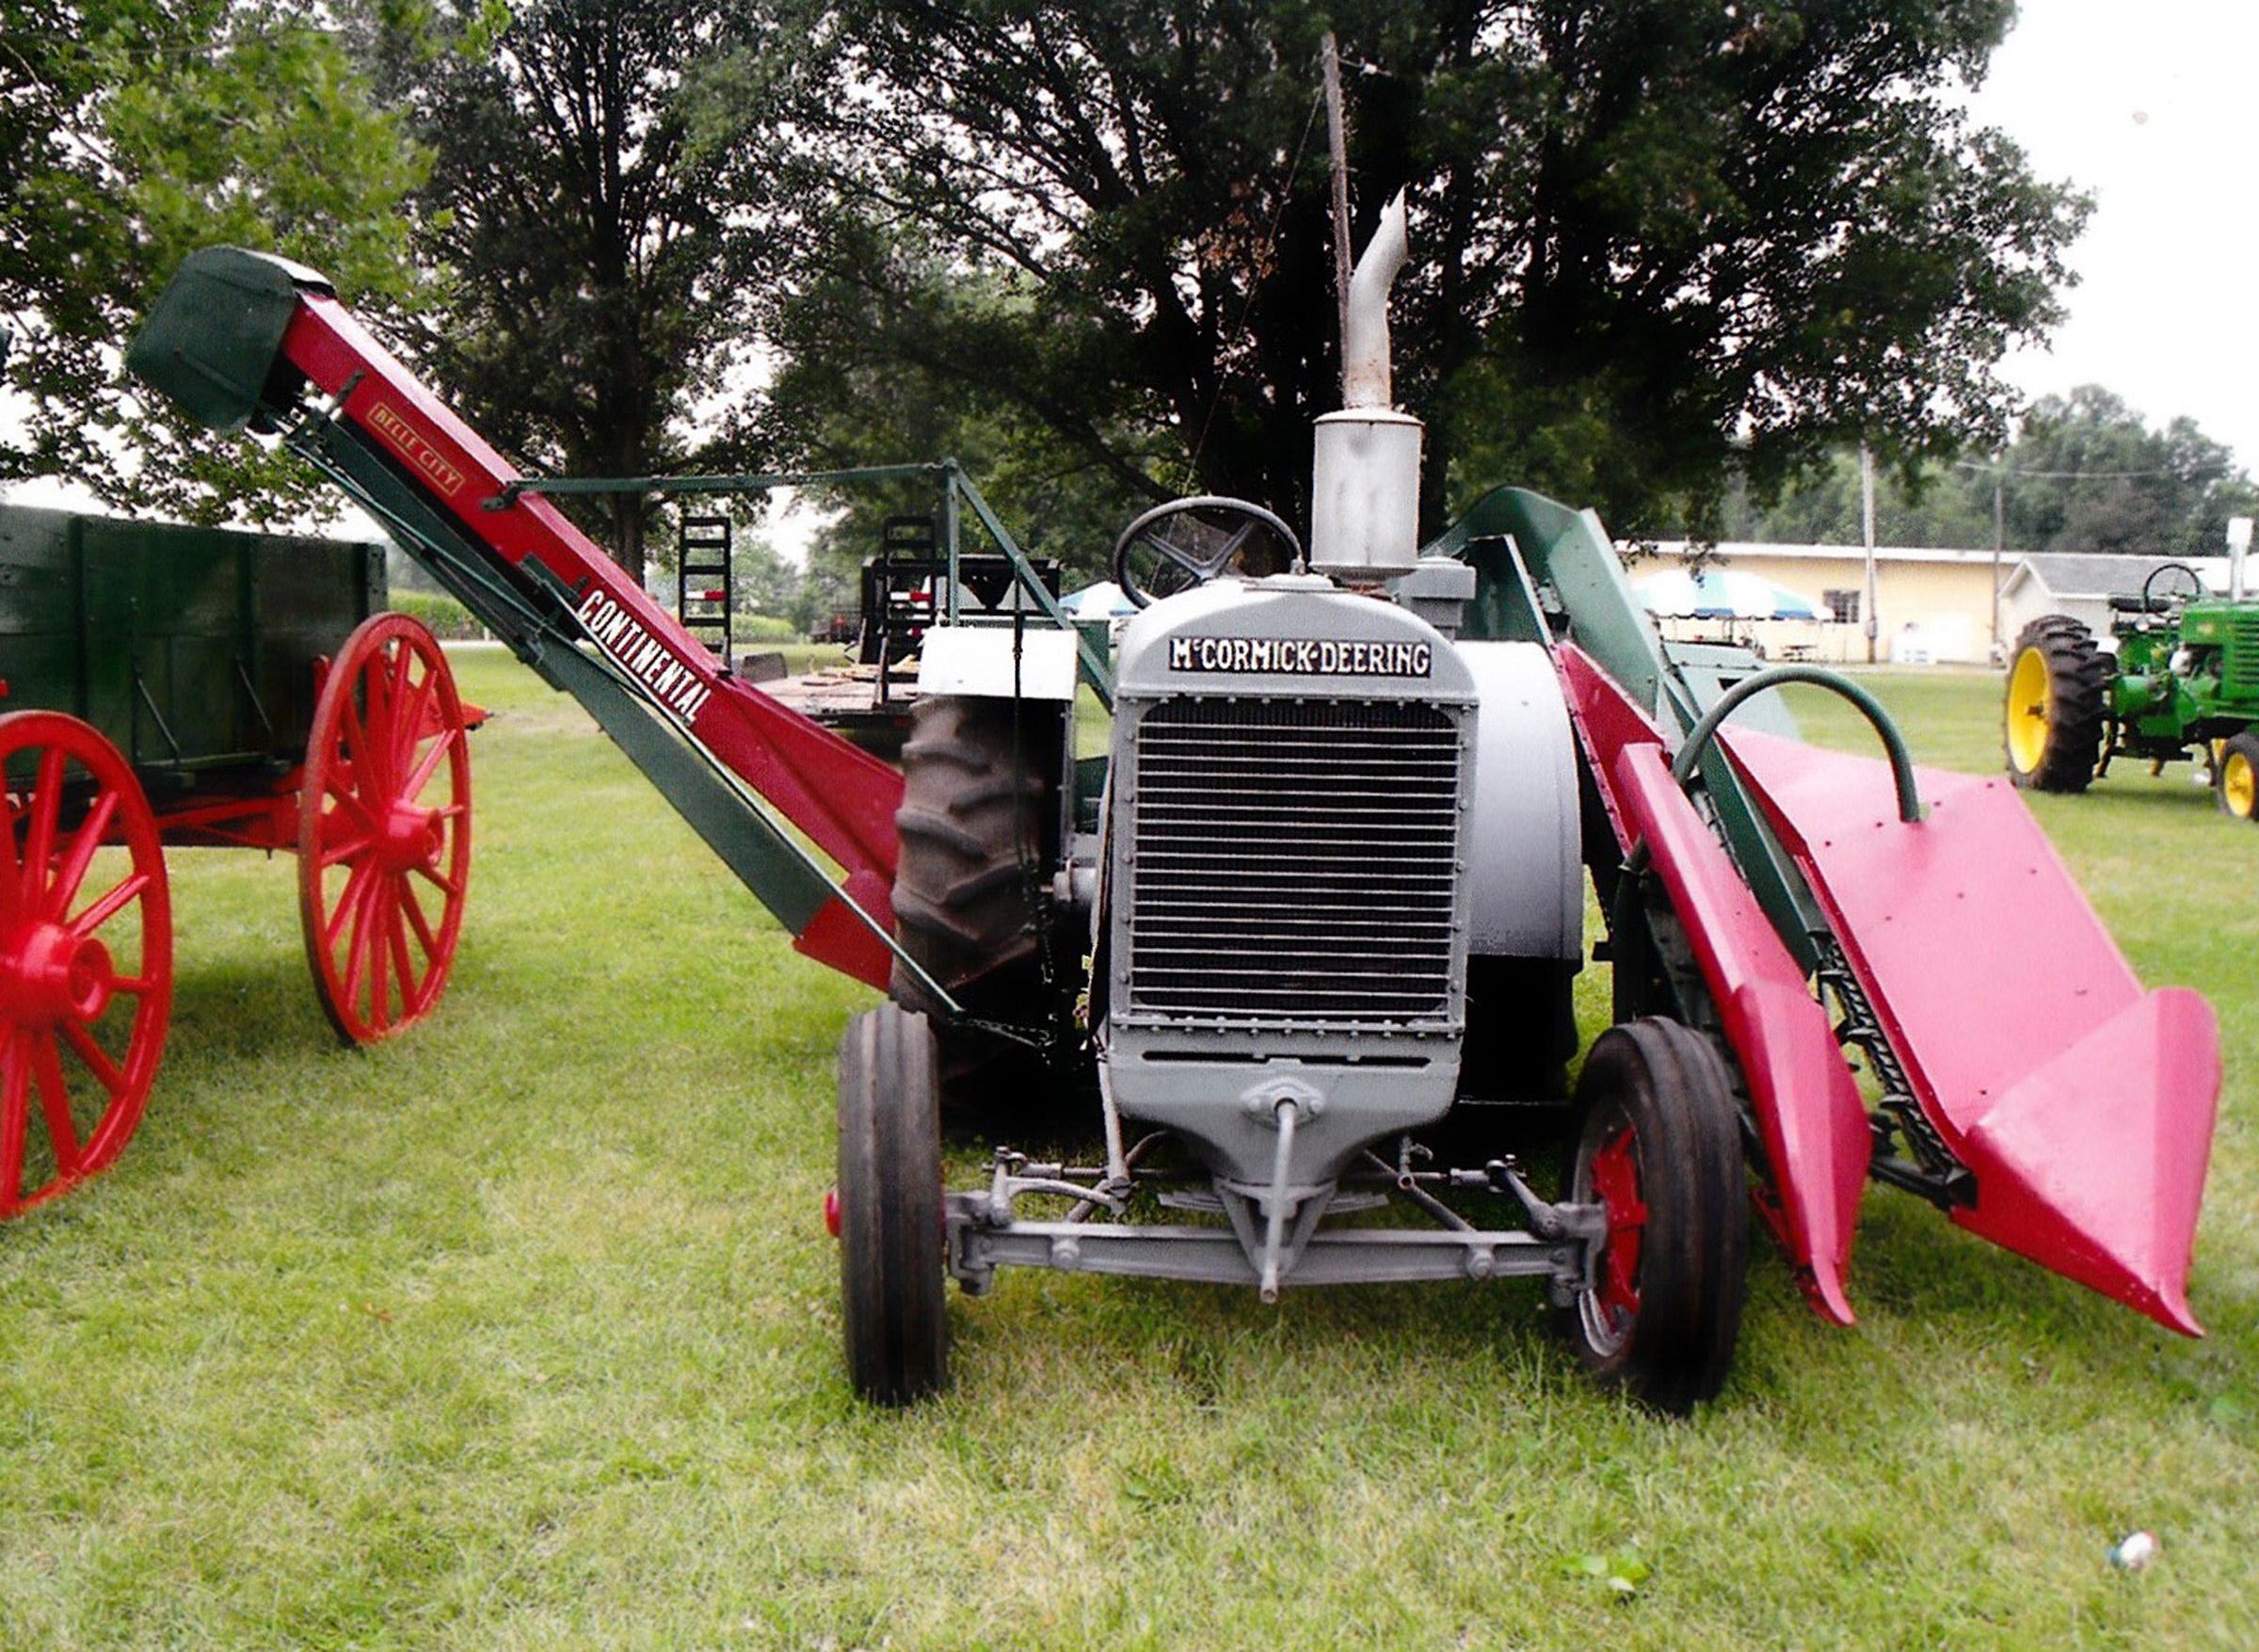 Three young men from DeKalb County, Illinois, invented the first way to mount a picker directly onto a tractor, which they sold to Continental Cultor in Ohio. The manufacturing rights of the Continental Corn Picker, originally built in Ohio, was bought in 1930 by the Belle City Mfg. Co. in Racine. Francis McGrady of Indiana provided this photo of his restored rare Continental.